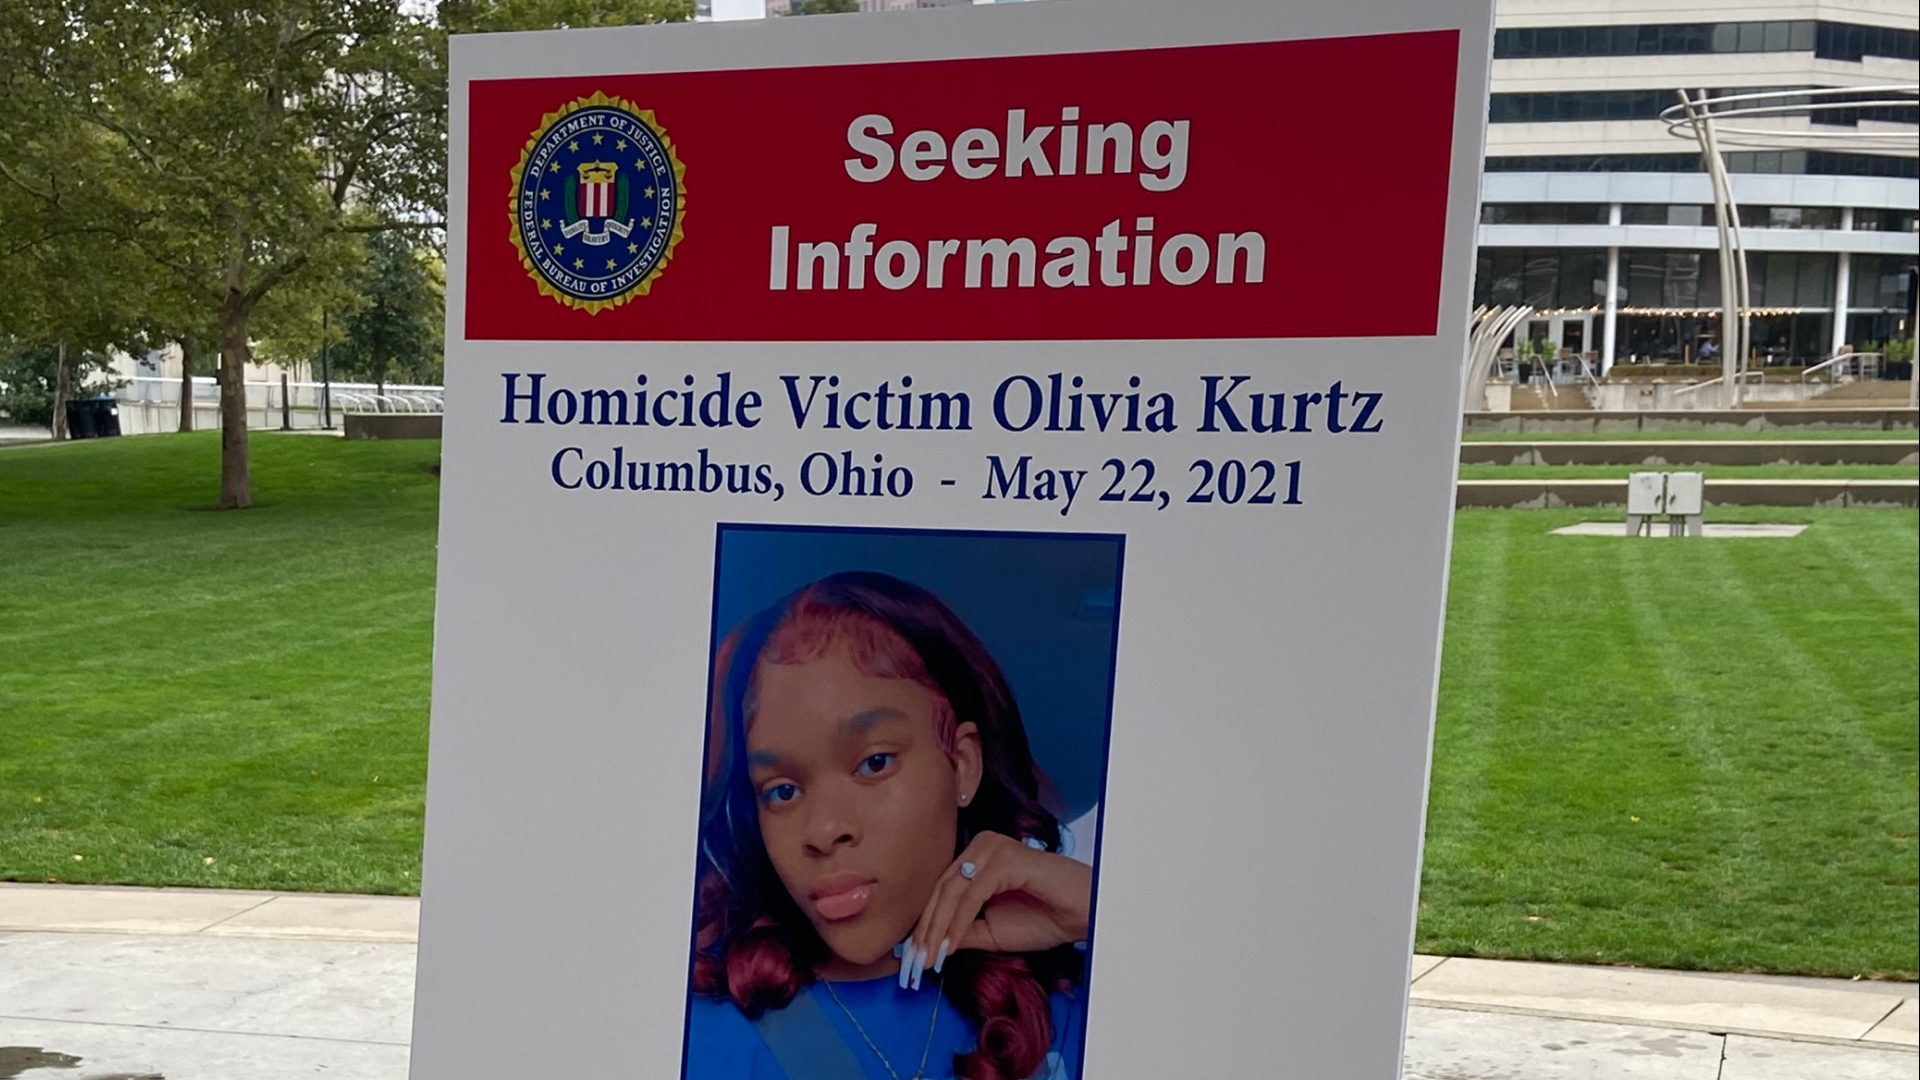 Olivia Kurtz was killed in a shooting that injured five other people, all under the age of 20, during a private party at the park on May 22, 2021.